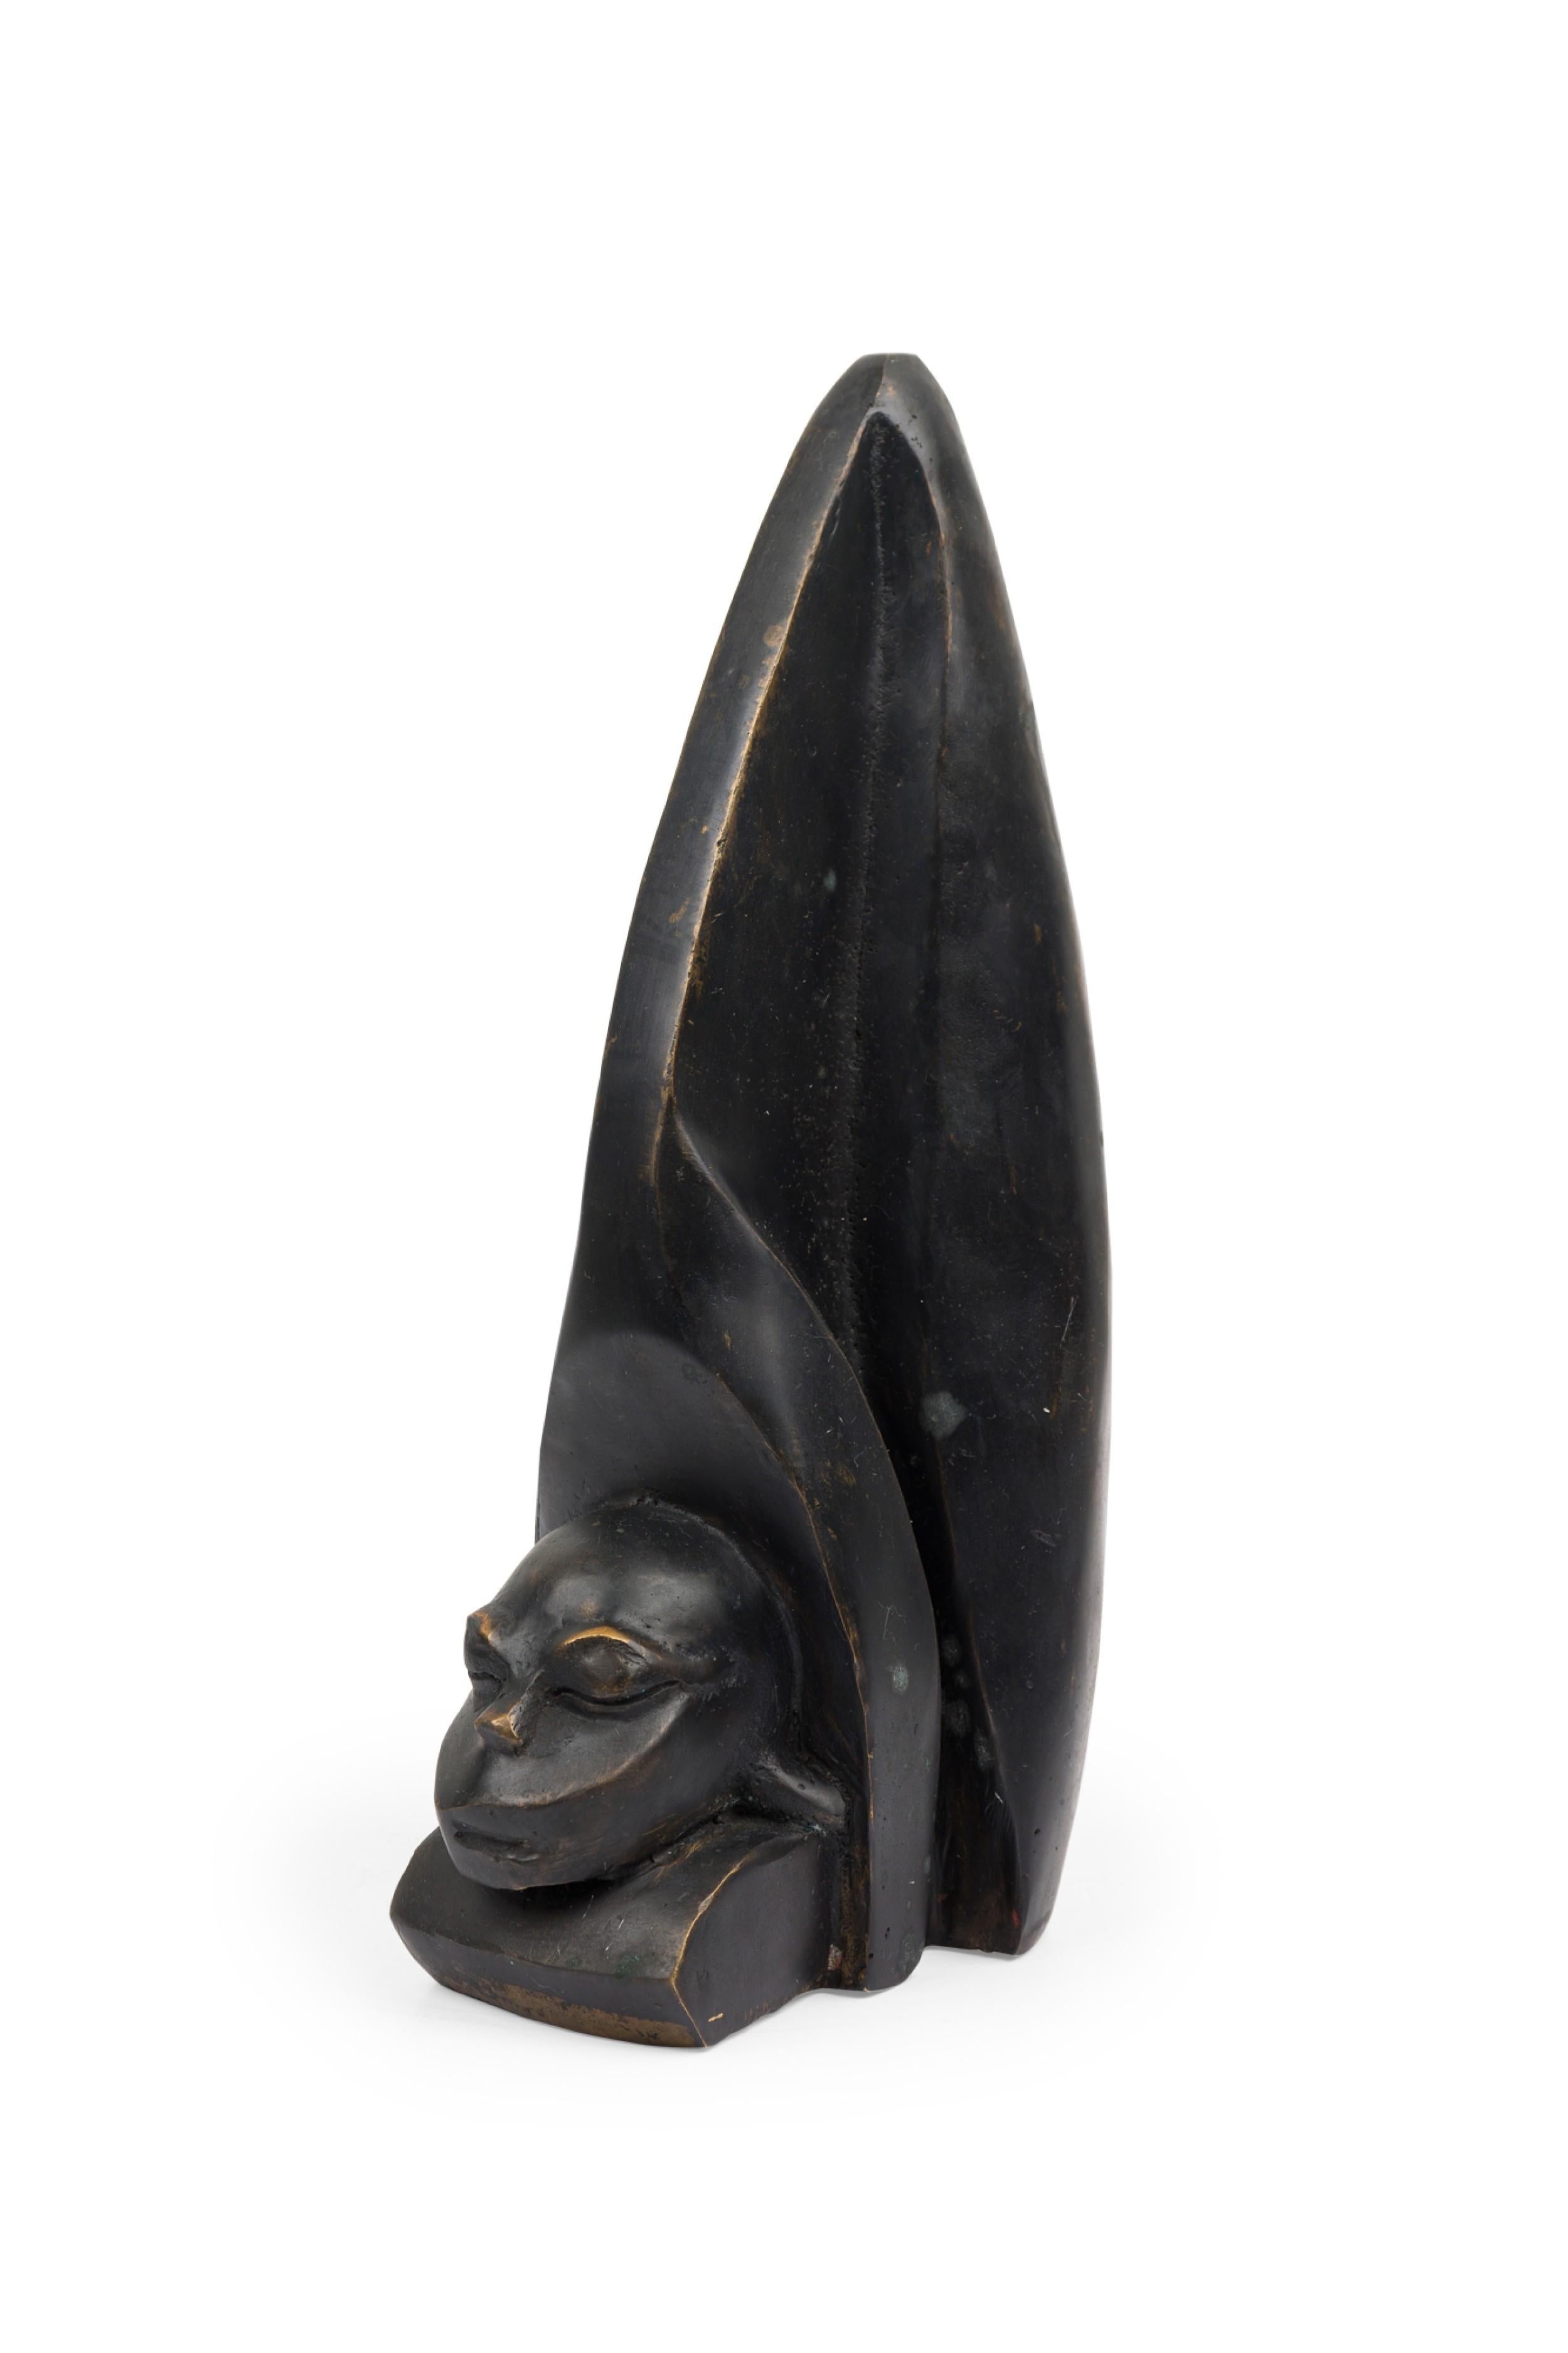 Contemporary hand-forged bronze Brutalist-inspired figural sculpture finished in an ebonized patina depicting a human head carved into a large animal\'s tooth. (PRICED EACH) (